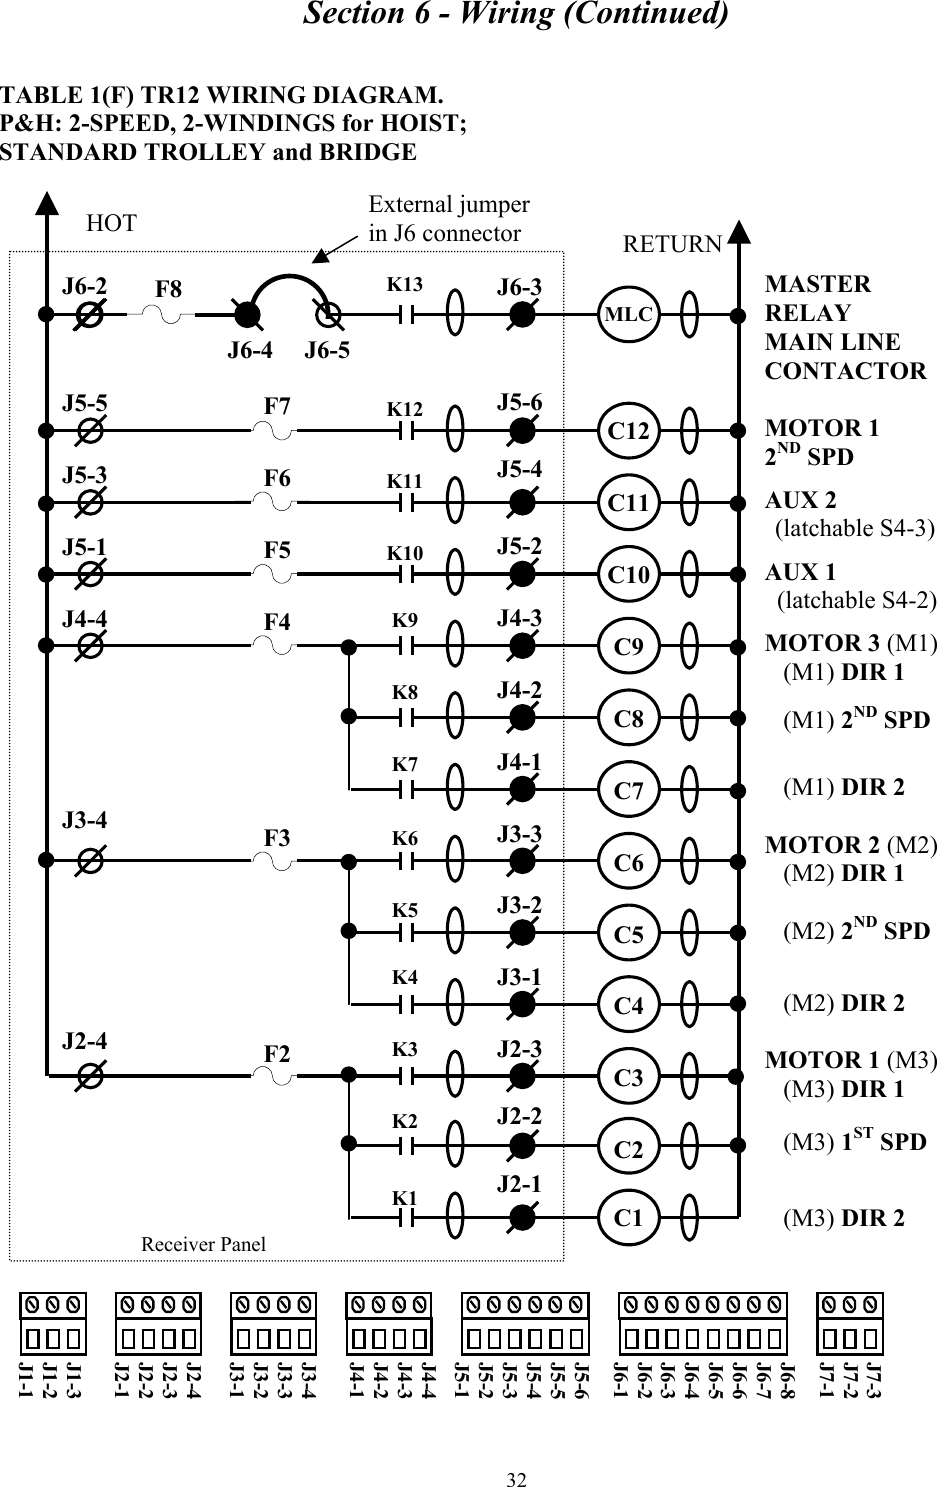 Section 6 - Wiring (Continued) 32  TABLE 1(F) TR12 WIRING DIAGRAM. P&amp;H: 2-SPEED, 2-WINDINGS for HOIST;  STANDARD TROLLEY and BRIDGE  MASTER  RELAY MAIN LINE CONTACTOR  MOTOR 1 2ND SPD   AUX 2   (latchable S4-3)  AUX 1   (latchable S4-2)  MOTOR 3 (M1)    (M1) DIR 1     (M1) 2ND SPD                     (M1) DIR 2  MOTOR 2 (M2)    (M2) DIR 1     (M2) 2ND SPD                     (M2) DIR 2  MOTOR 1 (M3)    (M3) DIR 1     (M3) 1ST SPD                     (M3) DIR 2      Receiver Panel J6-2    J5-5  J5-3  J5-1  J4-4      J3-4        J2-4 J6-3    J5-6  J5-4   J5-2  J4-3  J4-2  J4-1  J3-3  J3-2  J3-1  J2-3  J2-2  J2-1 HOT  RETURN K13     K12   K11   K10   K9   K8   K7   K6   K5   K4   K3   K2   K1 MLC    C12  C11  C10  C9  C8  C7  C6  C5  C4  C3  C2  C1     F7  F6  F5  F4      F3        F2  J7-3 J7-2 J7-1  J6-8 J6-7 J6-6 J6-5 J6-4 J6-3 J6-2 J6-1   J5-6 J5-5 J5-4 J5-3 J5-2 J5-1  J4-4 J4-3 J4-2 J4-1  J3-4 J3-3 J3-2 J3-1  J2-4 J2-3 J2-2 J2-1  J1-3 J1-2 J1-1 External jumper in J6 connector J6-4     J6-5 F8 